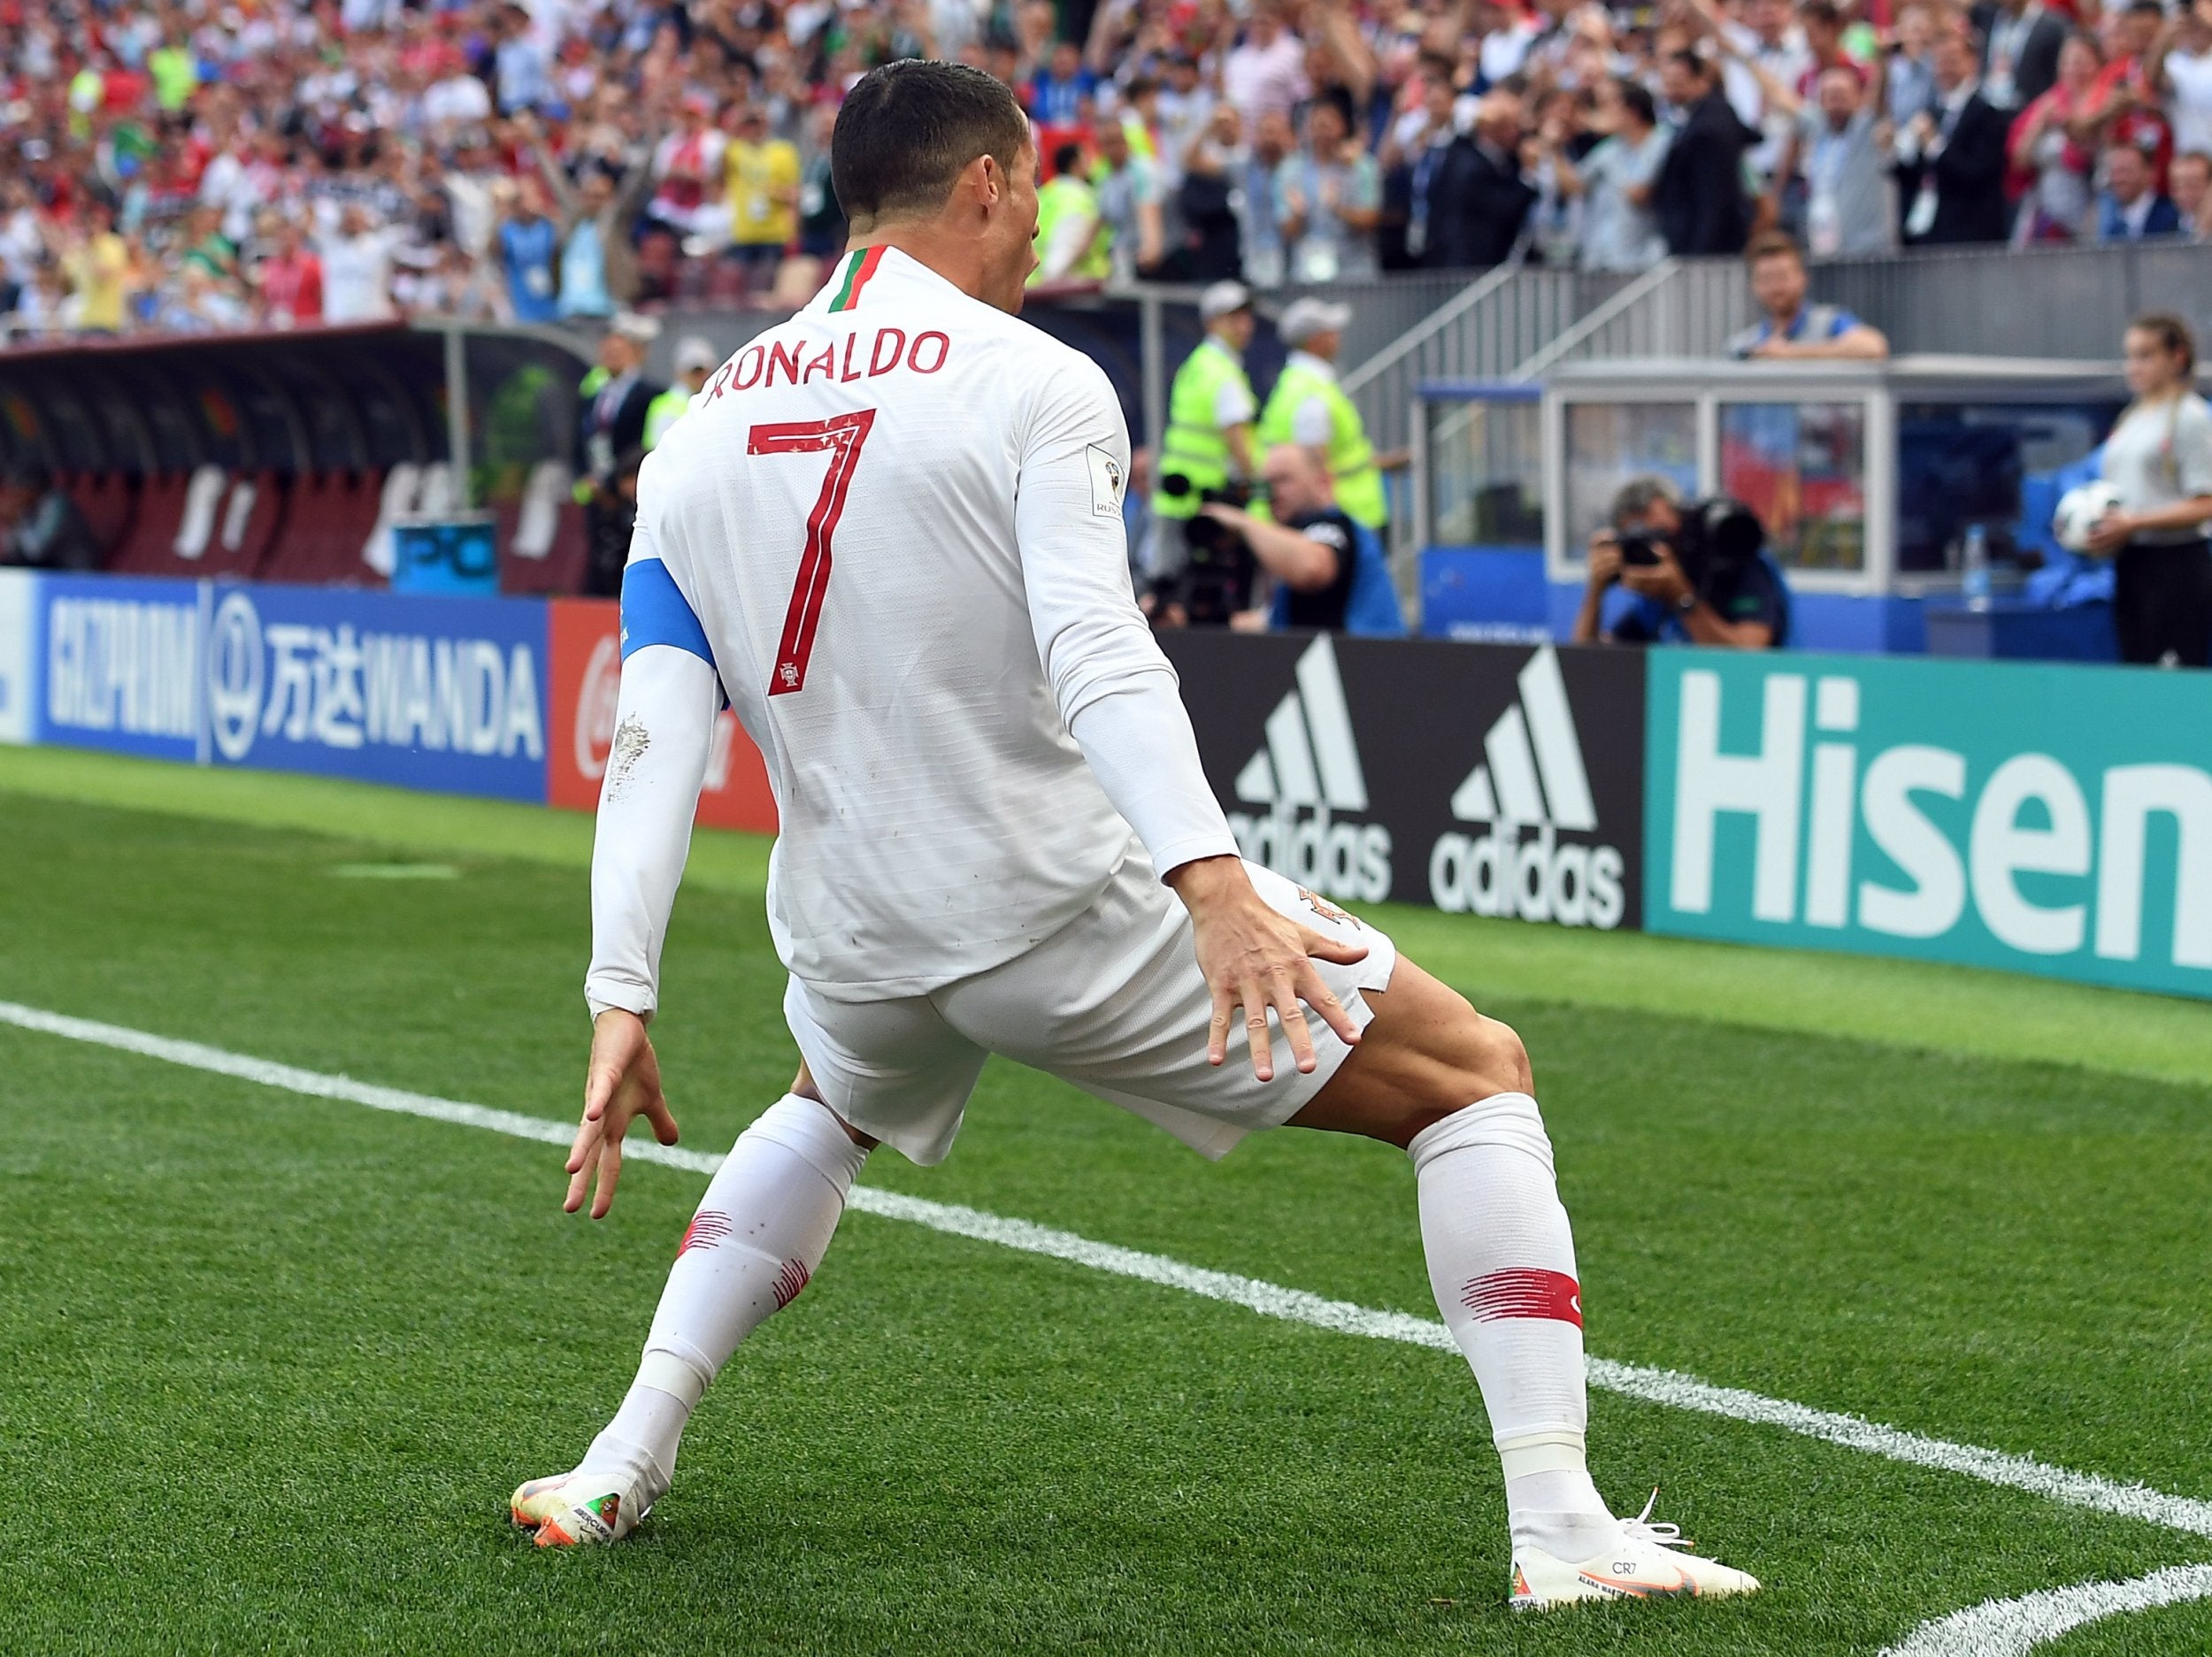 Ronaldo's goal was enough to give Portugal the win